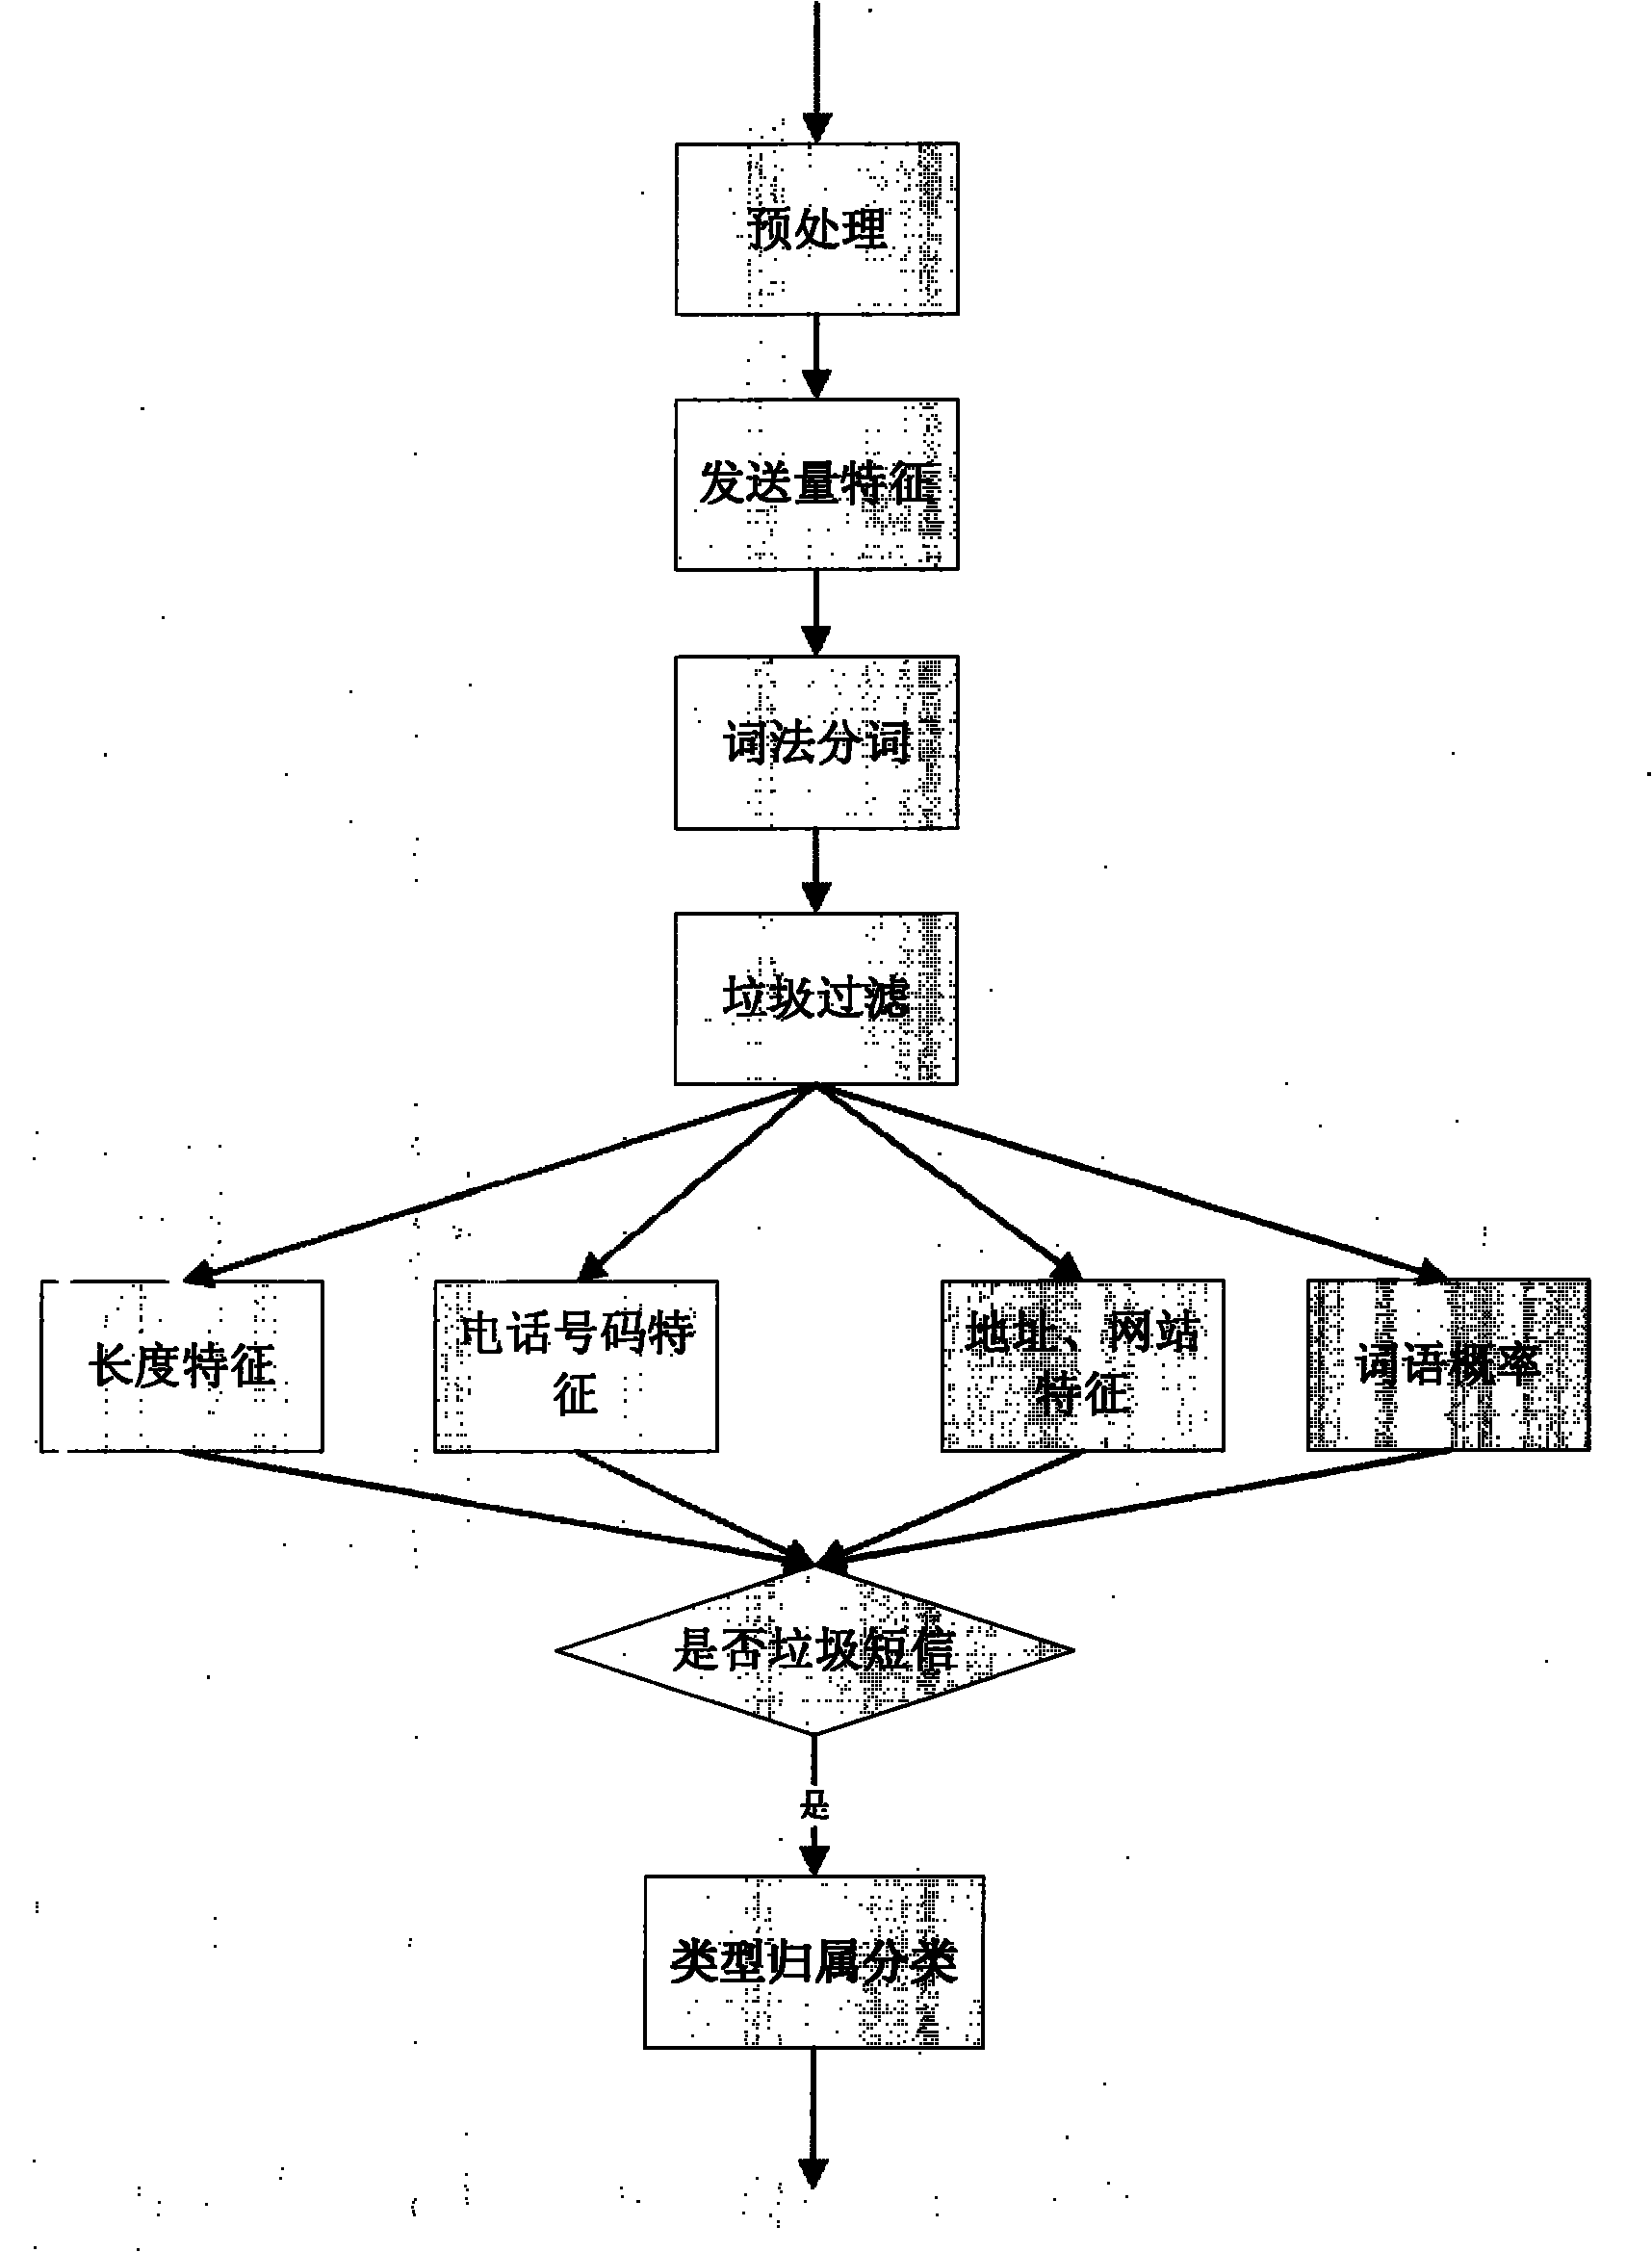 Method and system for filtering and classifying short messages